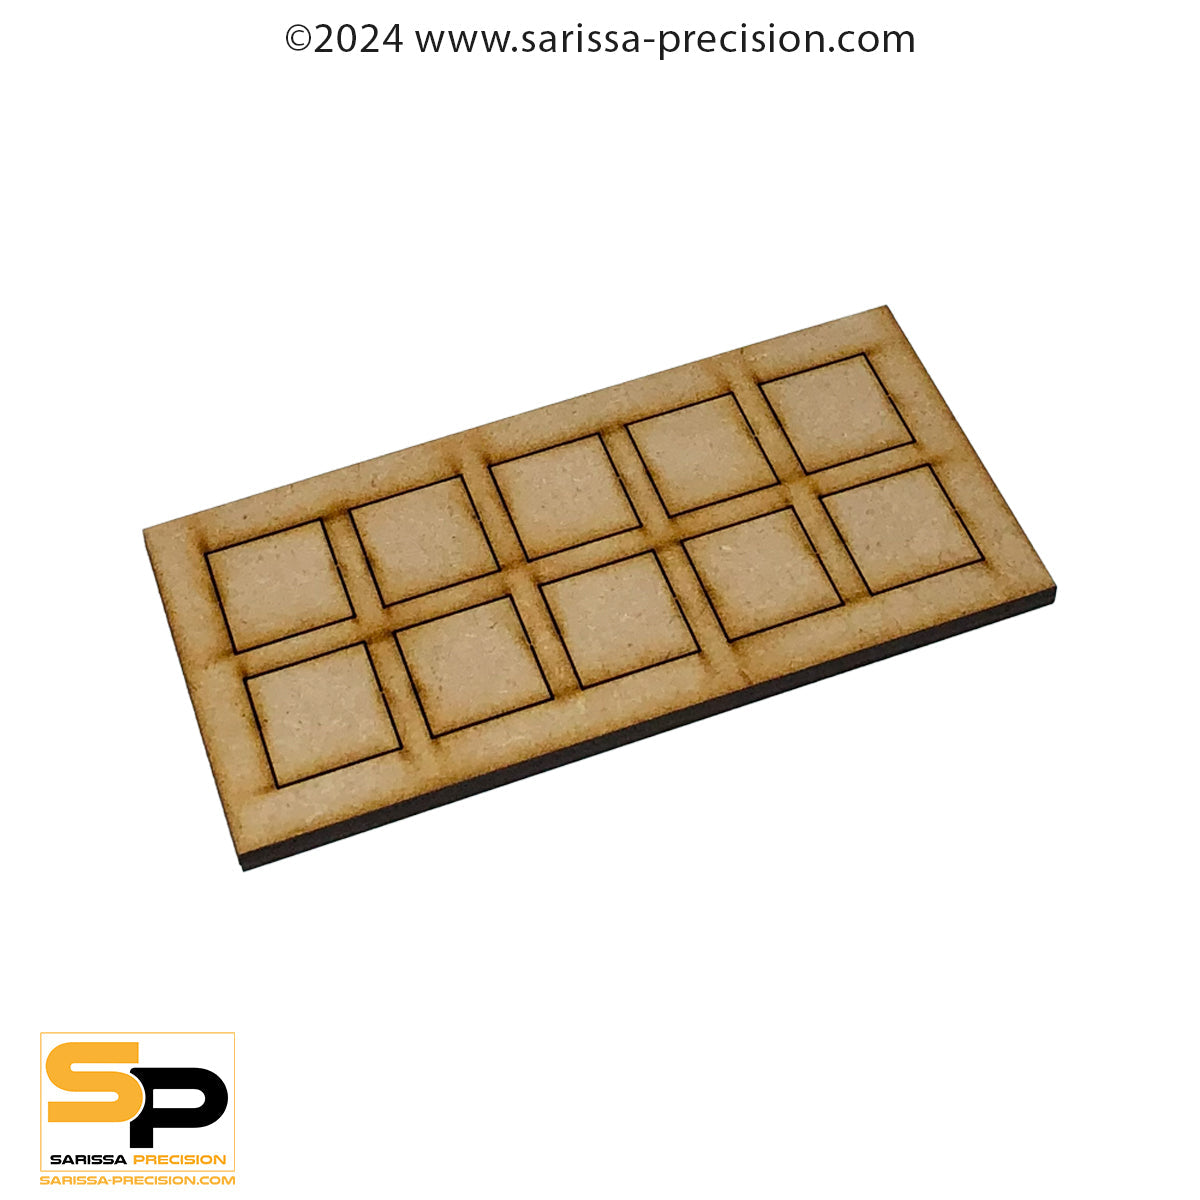 11 x 5 25x25mm Conversion Tray for 20x20mm bases